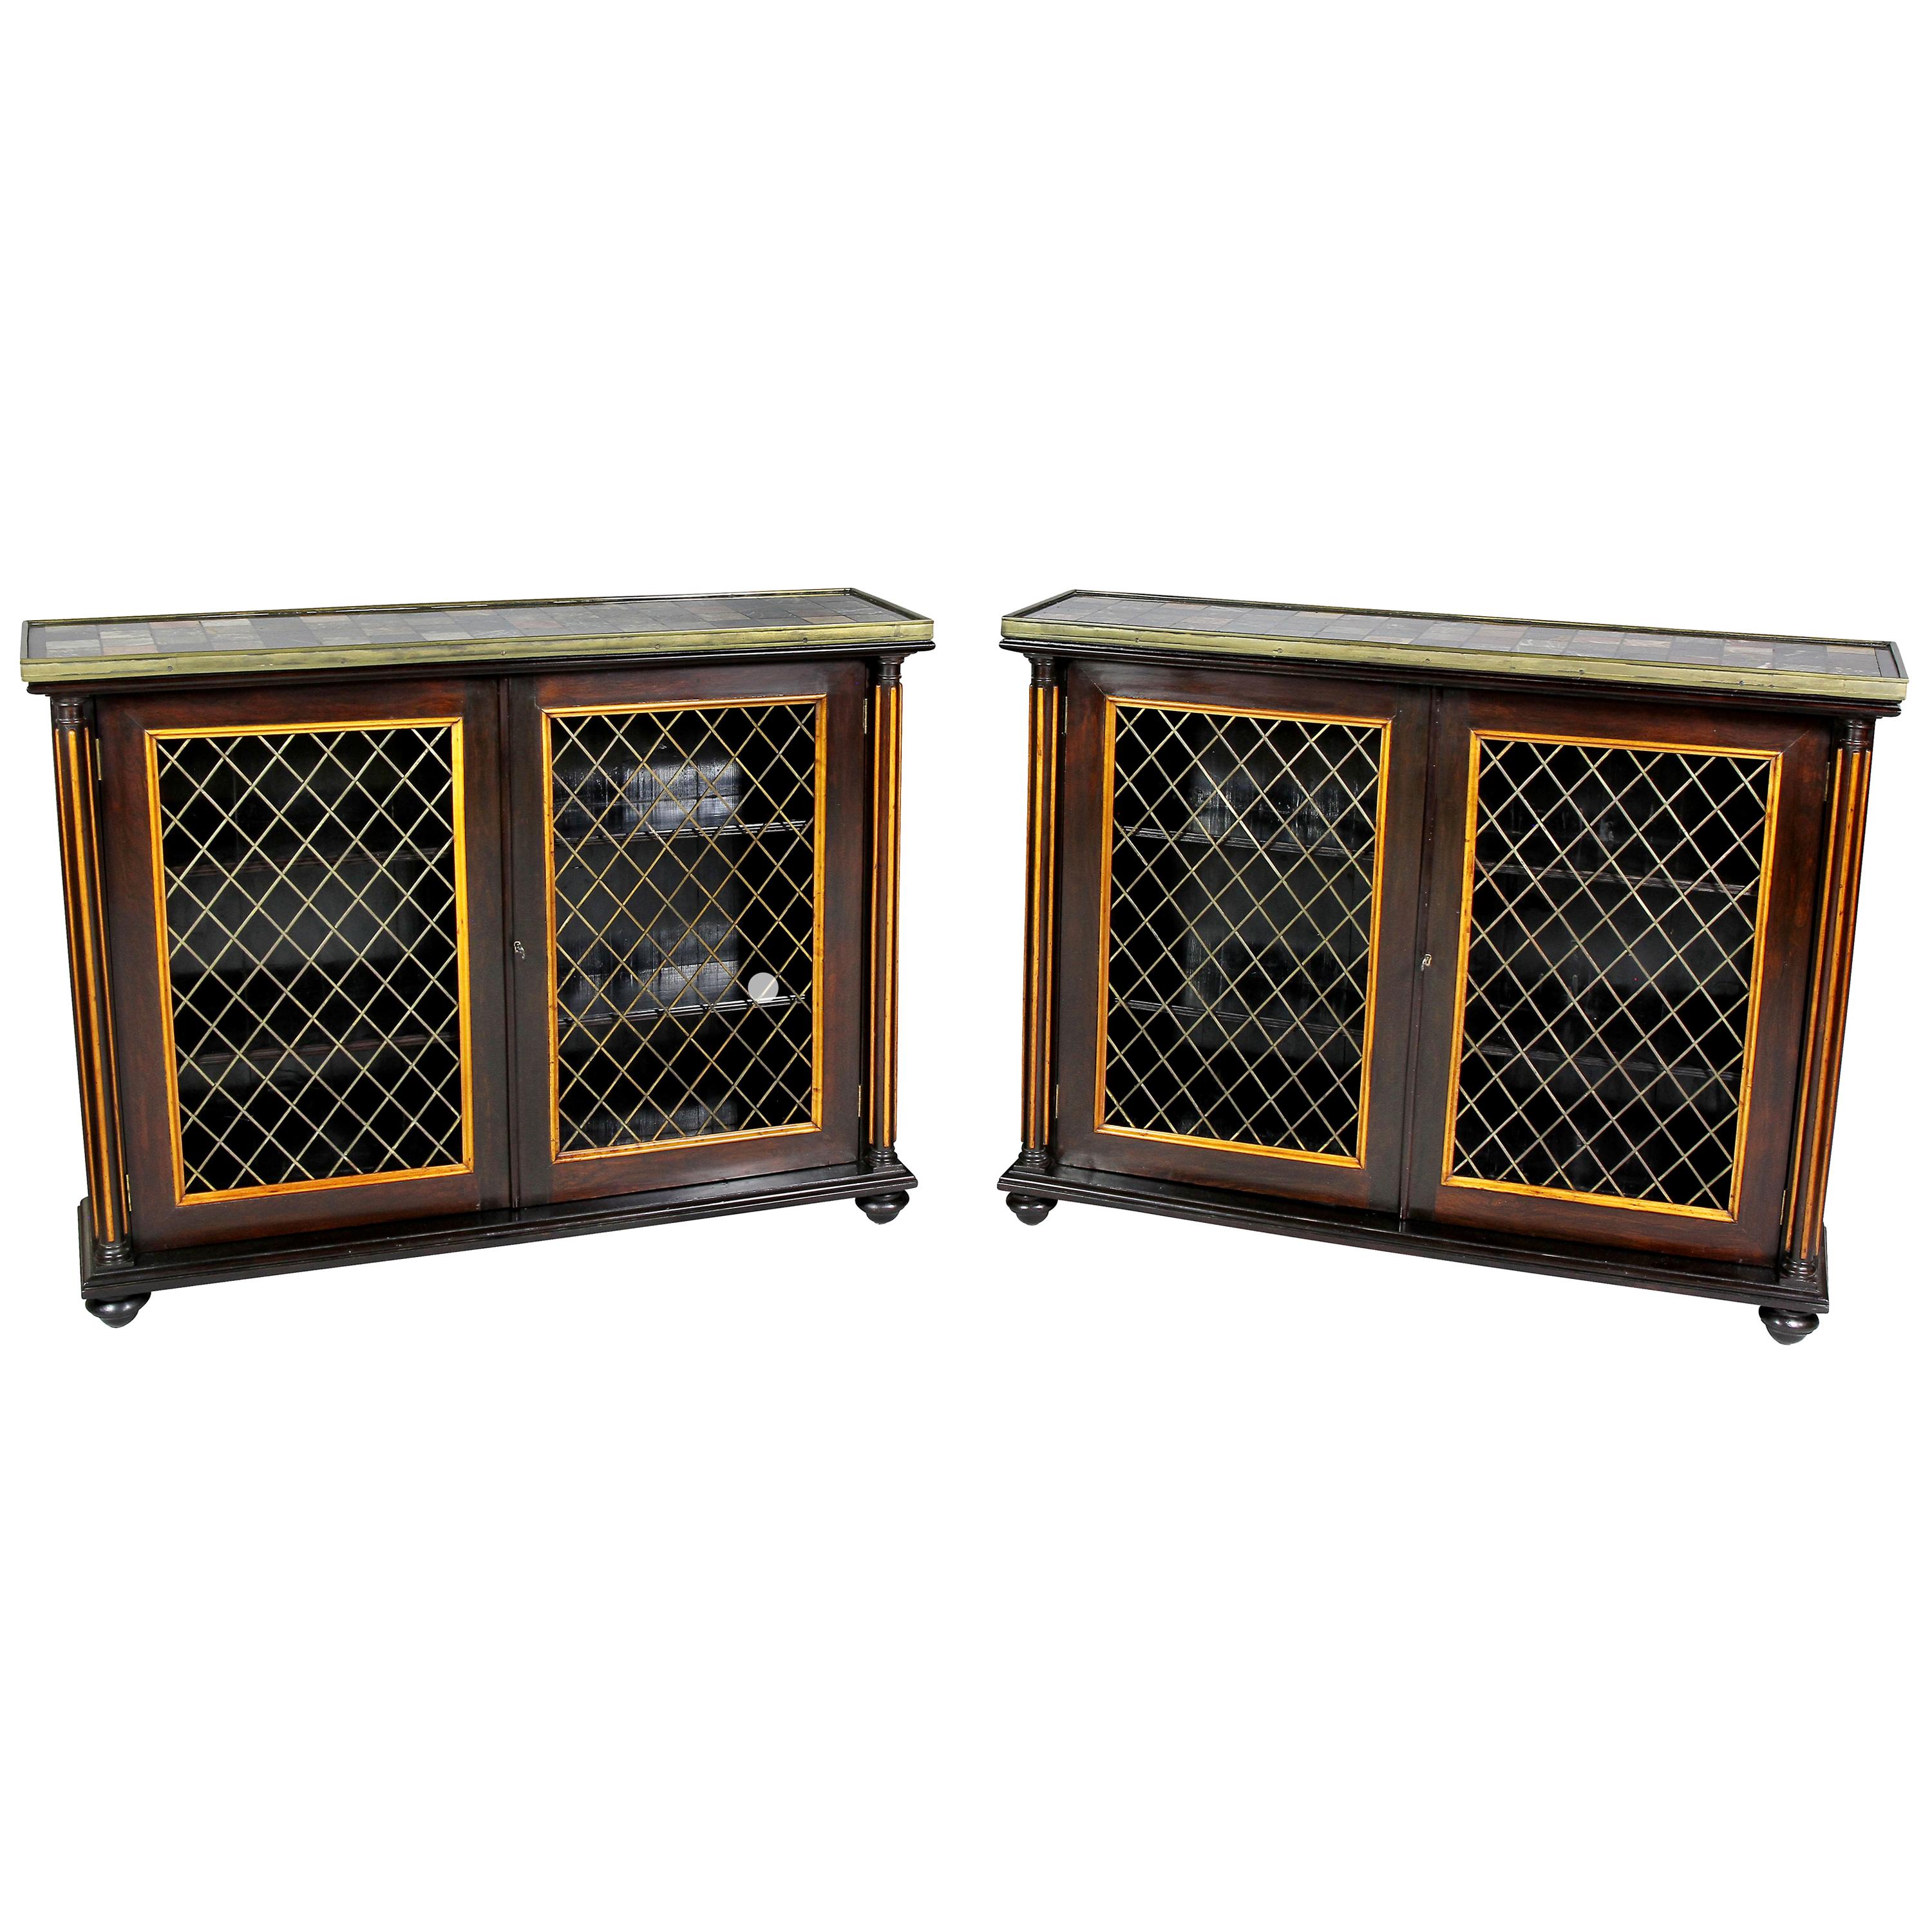 Pair of Regency Rosewood and Satinwood Cabinets / Credenzas